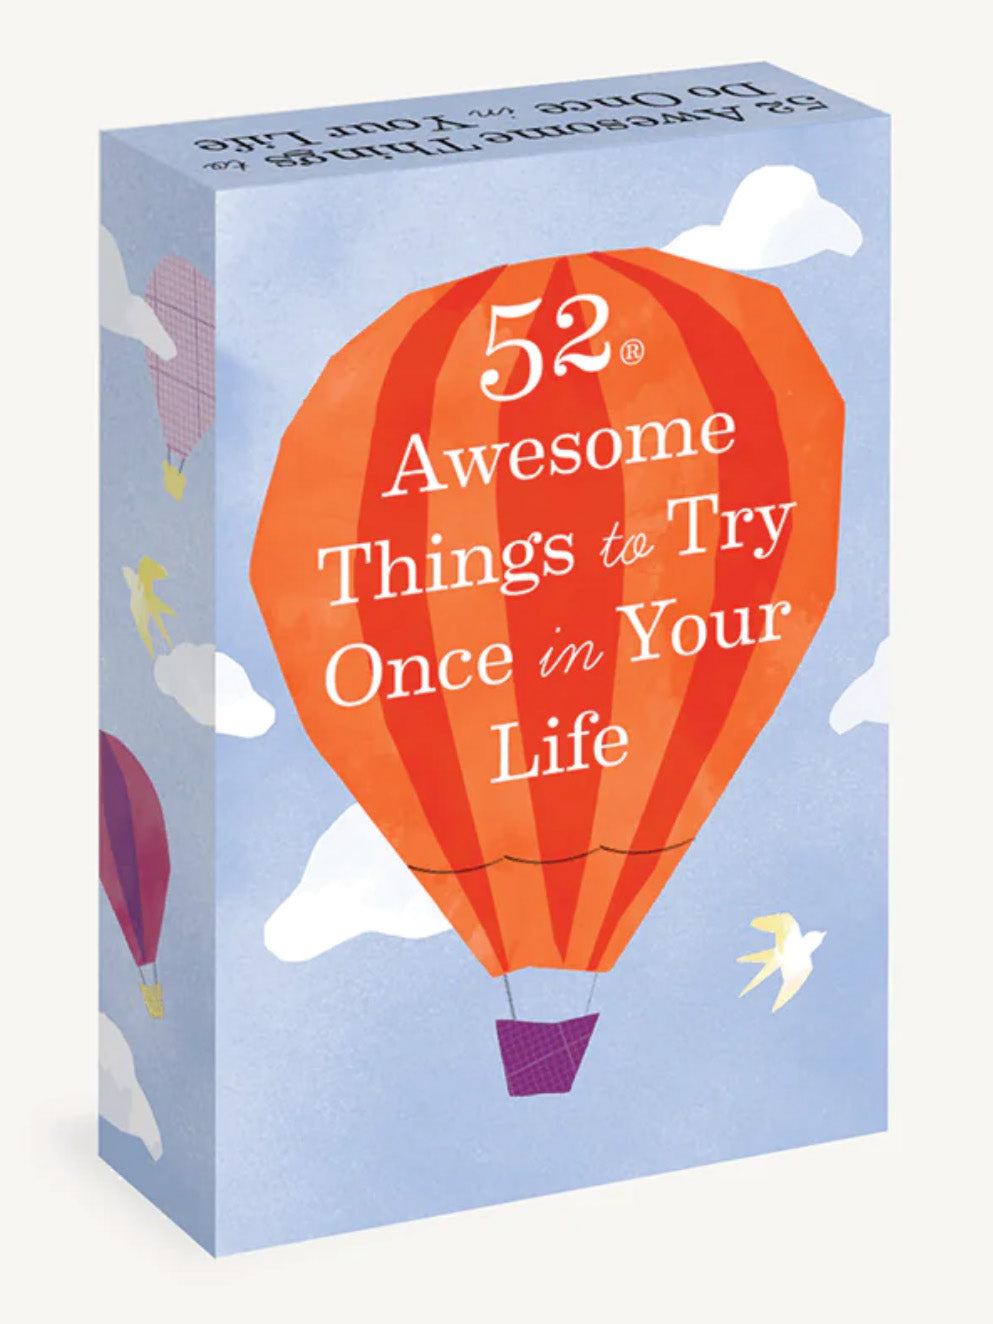 52 awesome things to try once in your life